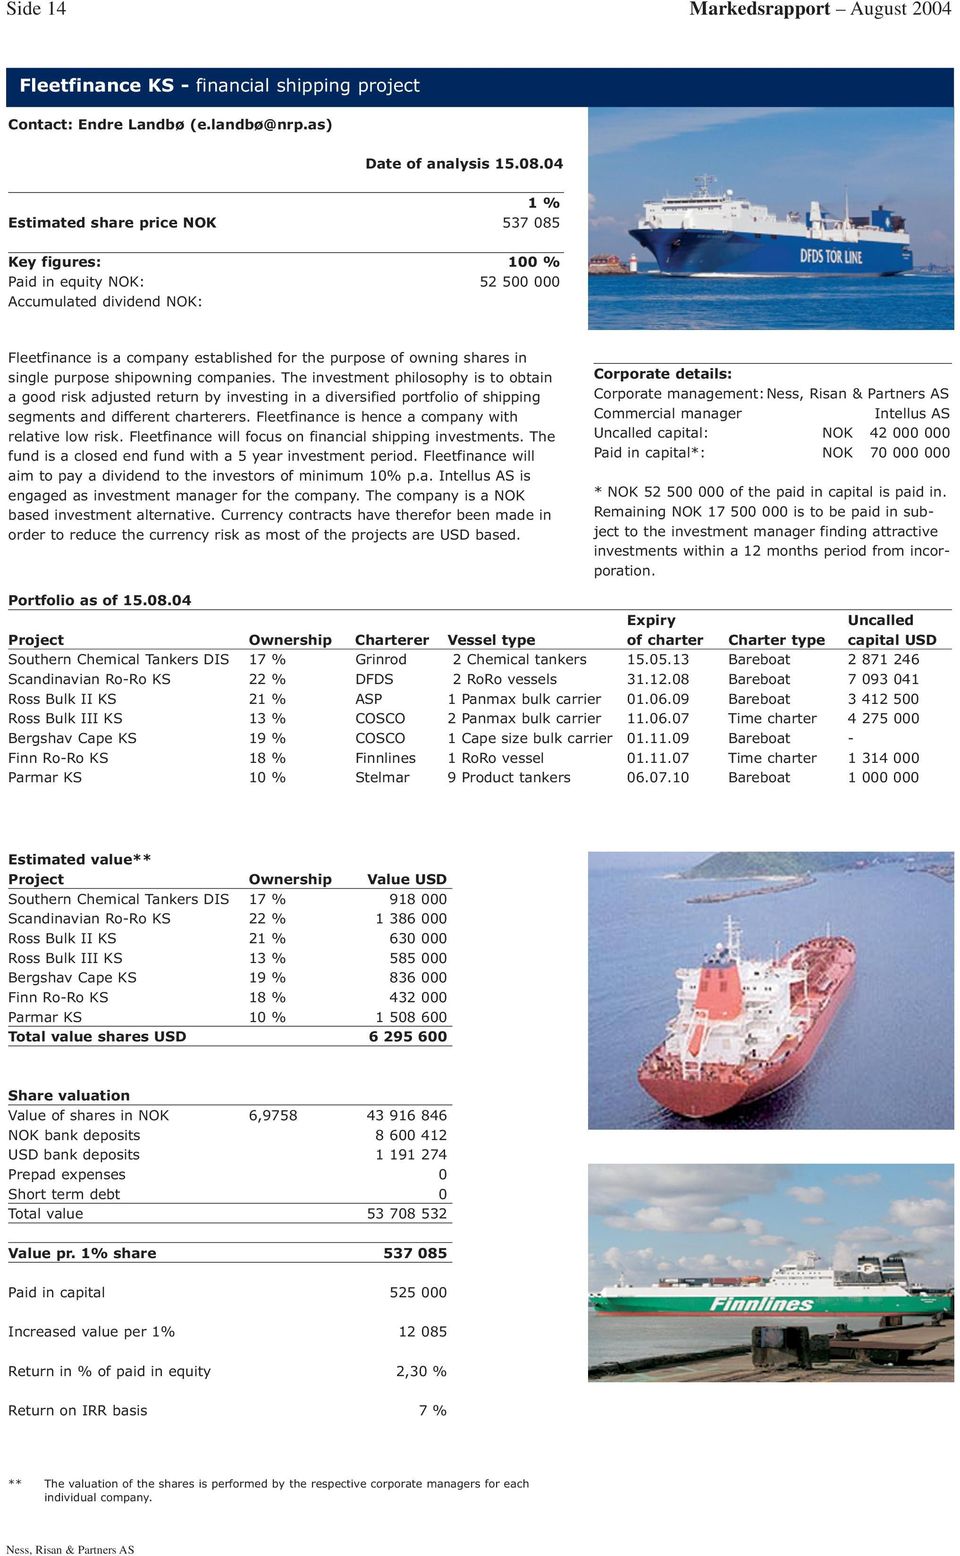 purpose shipowning companies. The investment philosophy is to obtain a good risk adjusted return by investing in a diversified portfolio of shipping segments and different charterers.